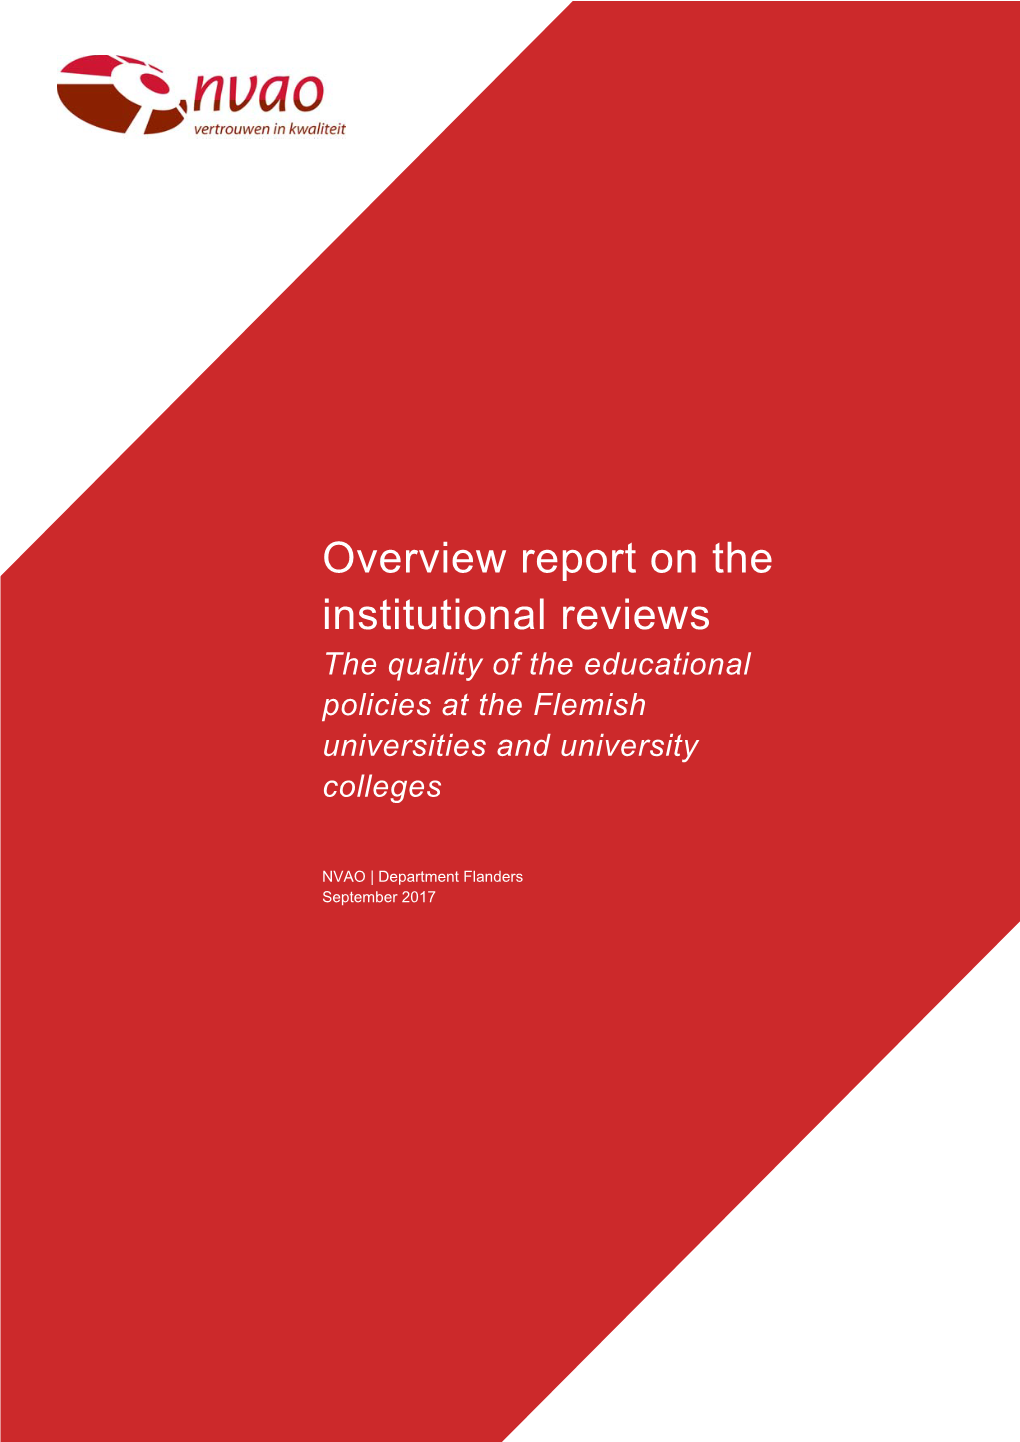 Overview Report on the Institutional Reviews-2017